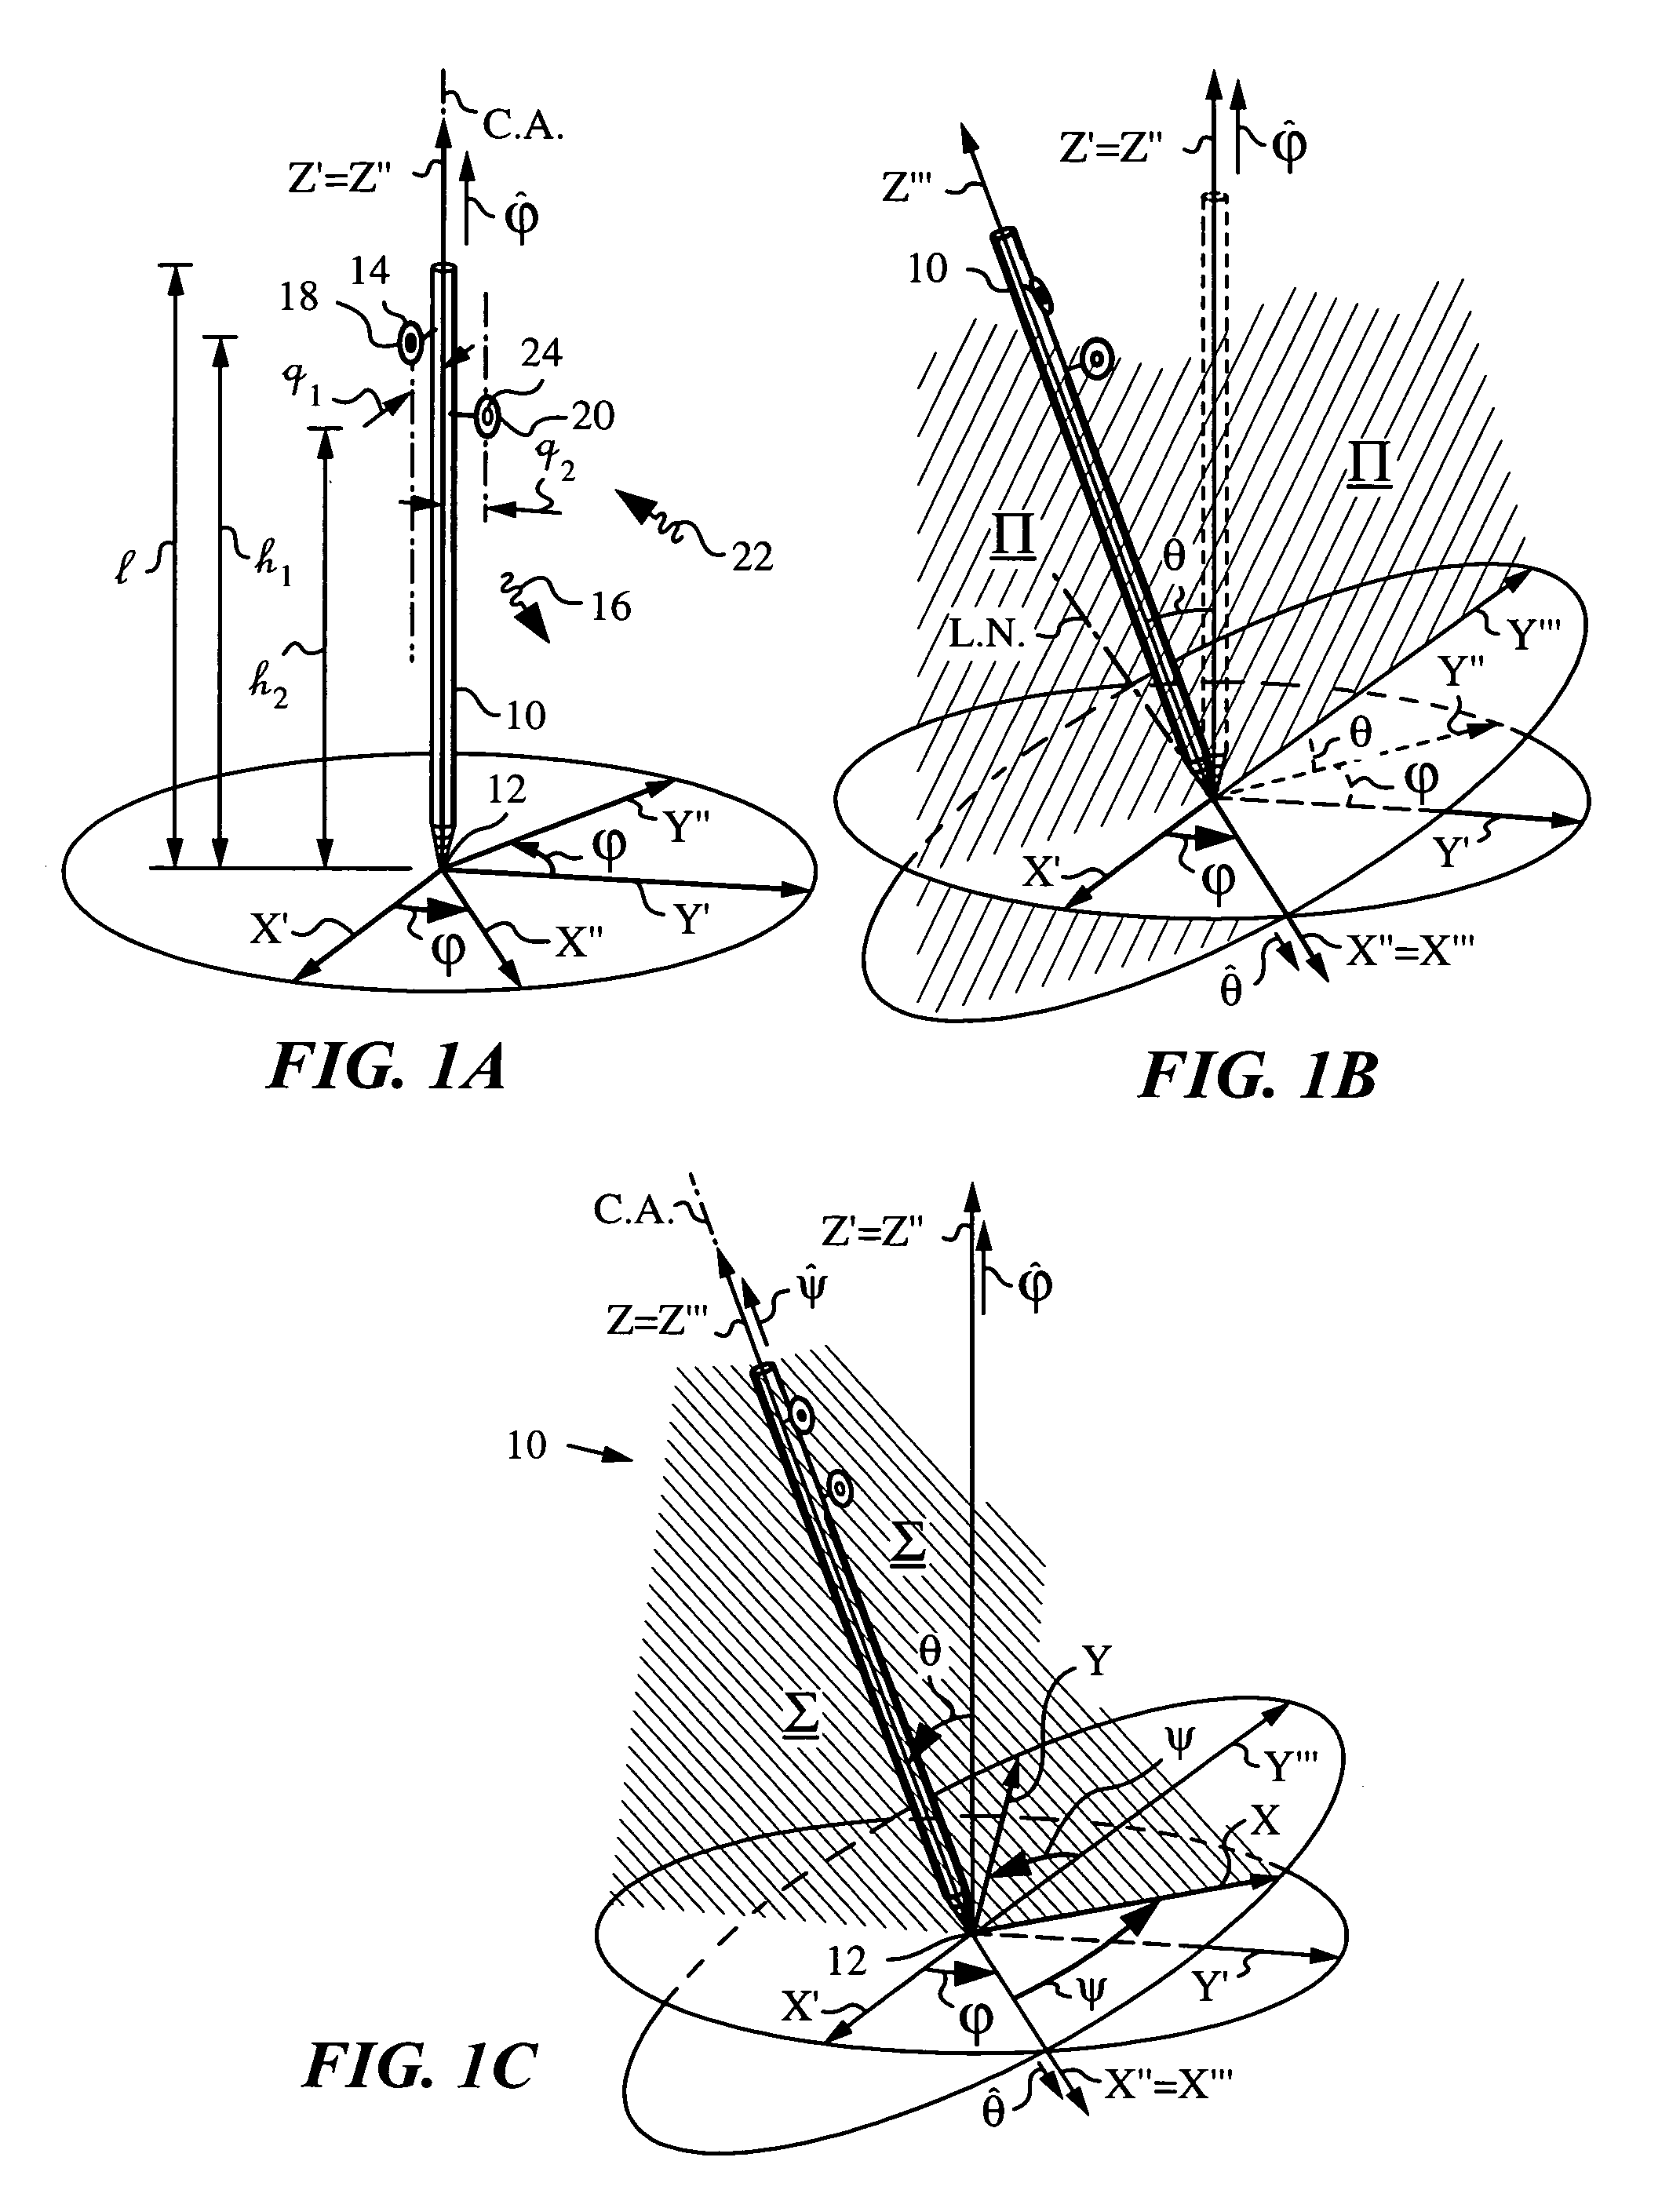 Apparatus and method for determining orientation parameters of an elongate object